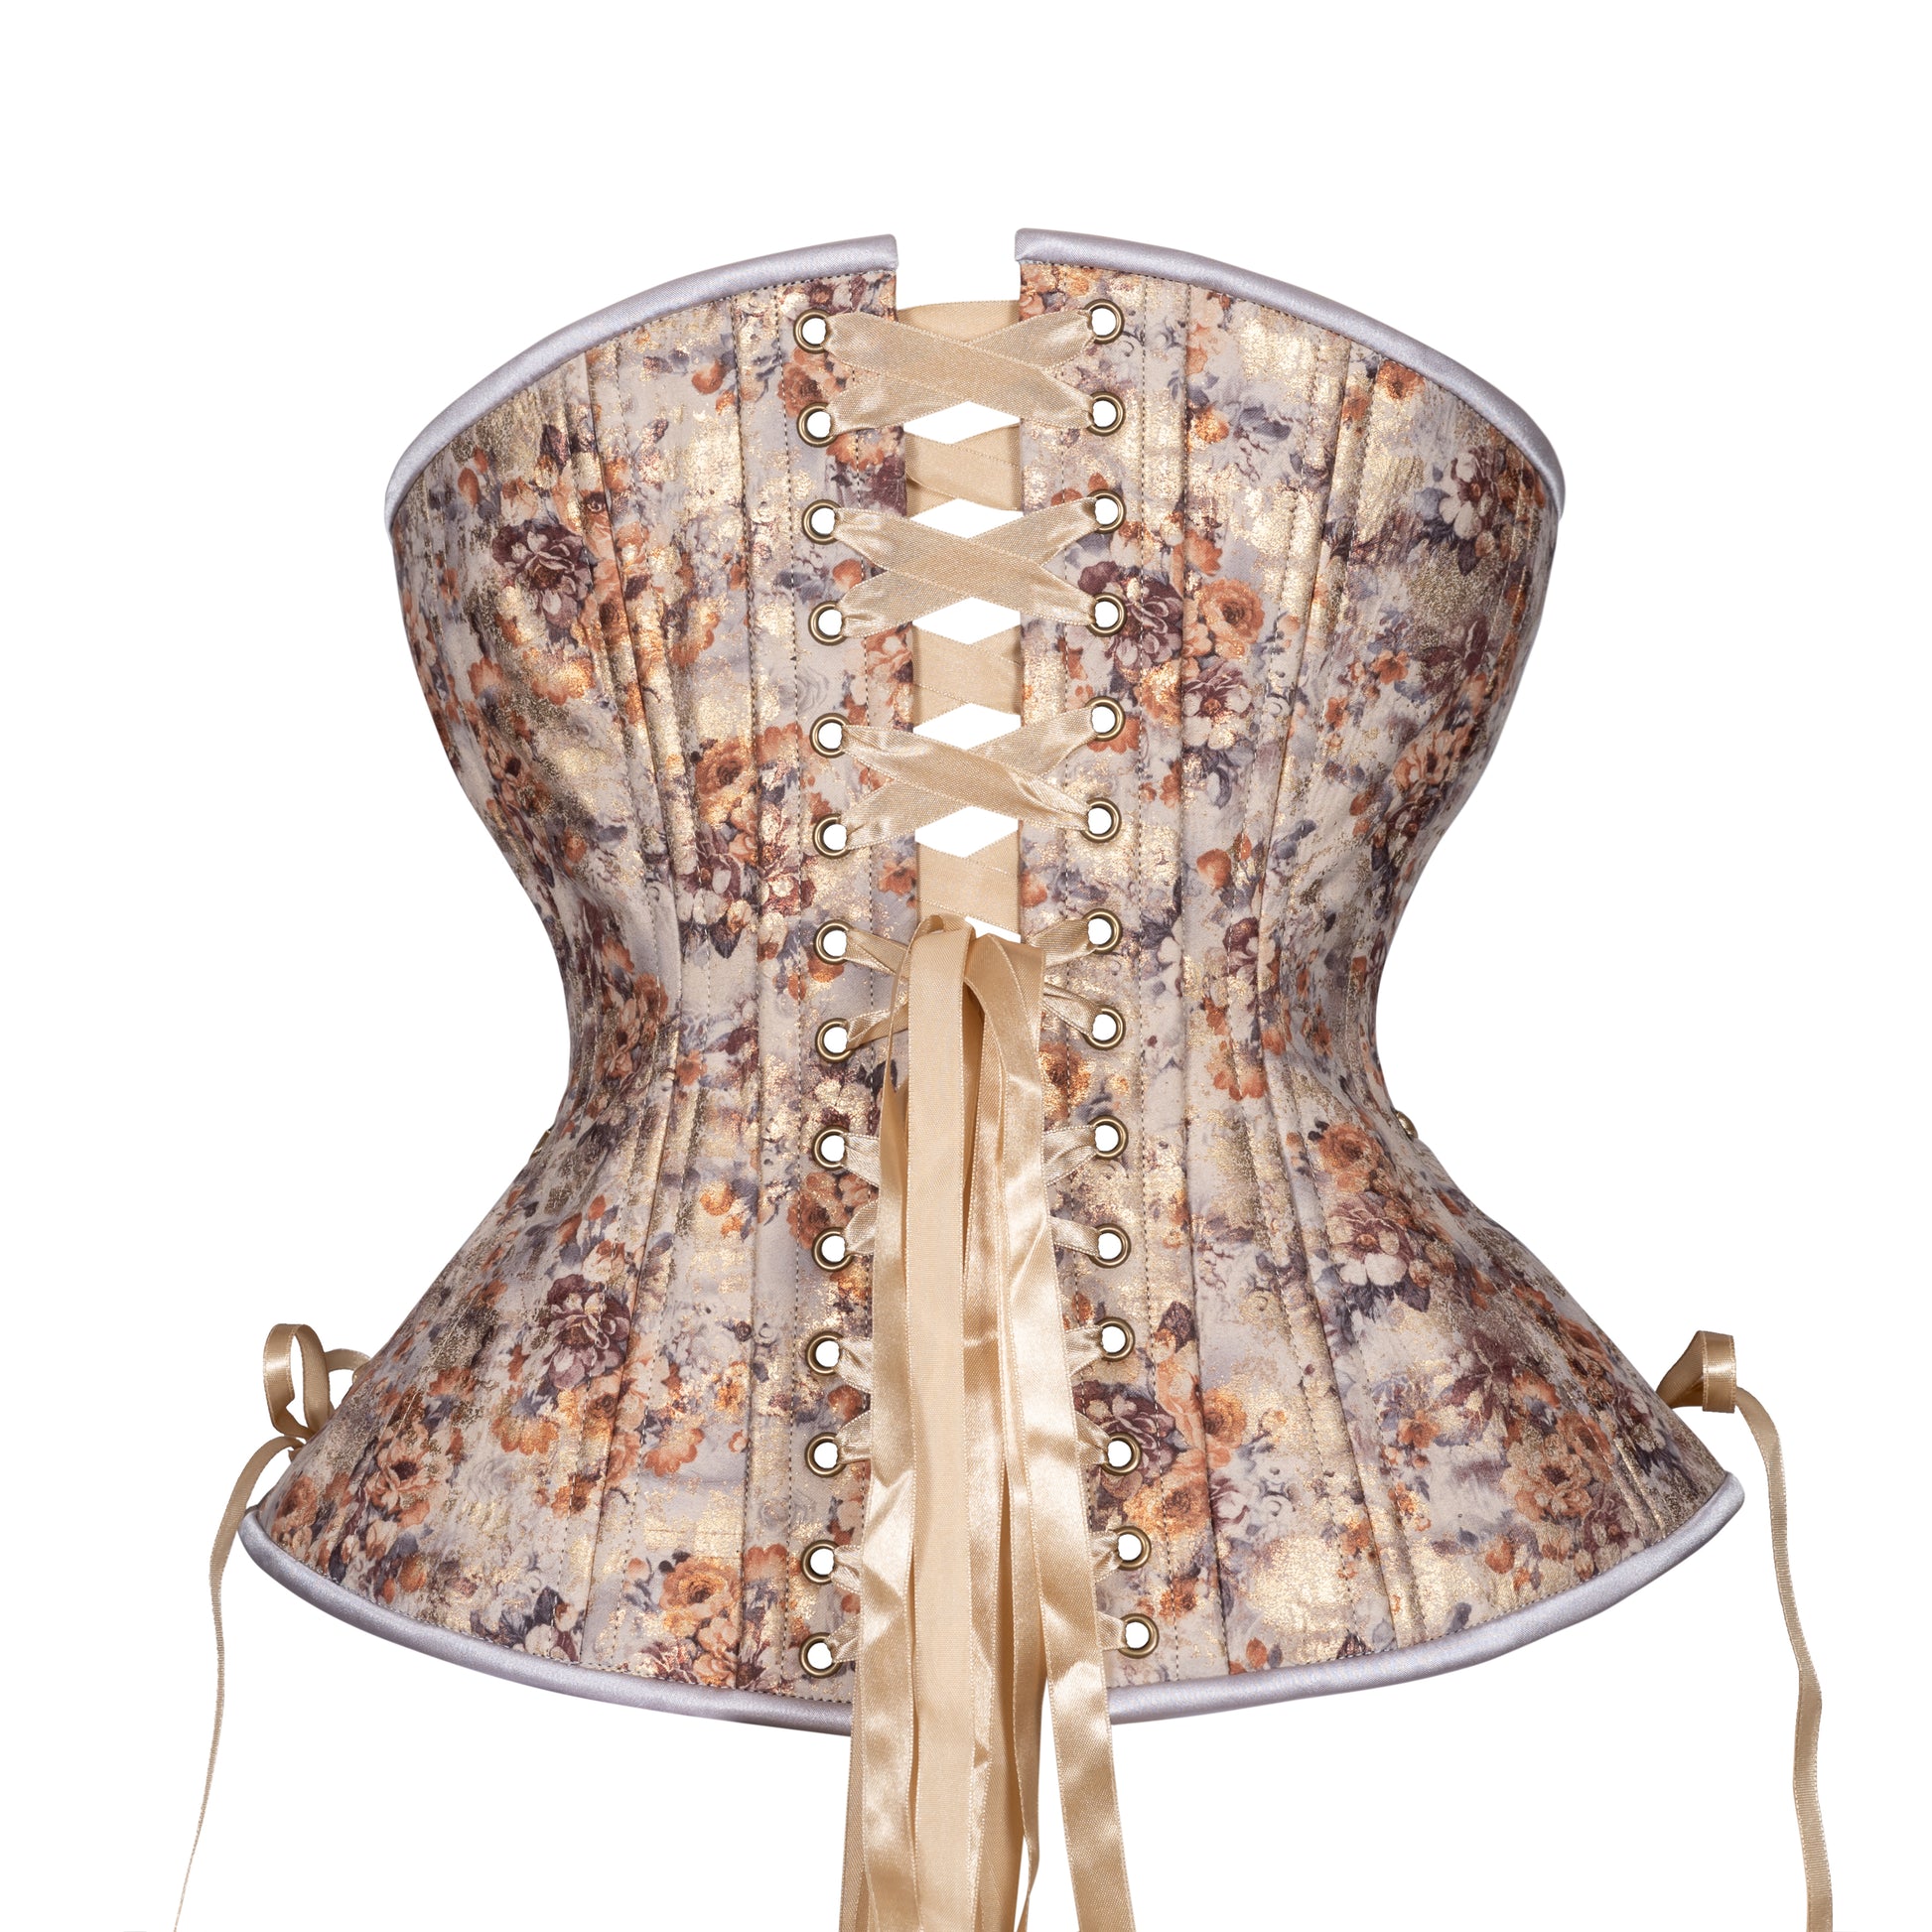 Floral Shimmer in Sepia Corset, Hourglass Silhouette, Long